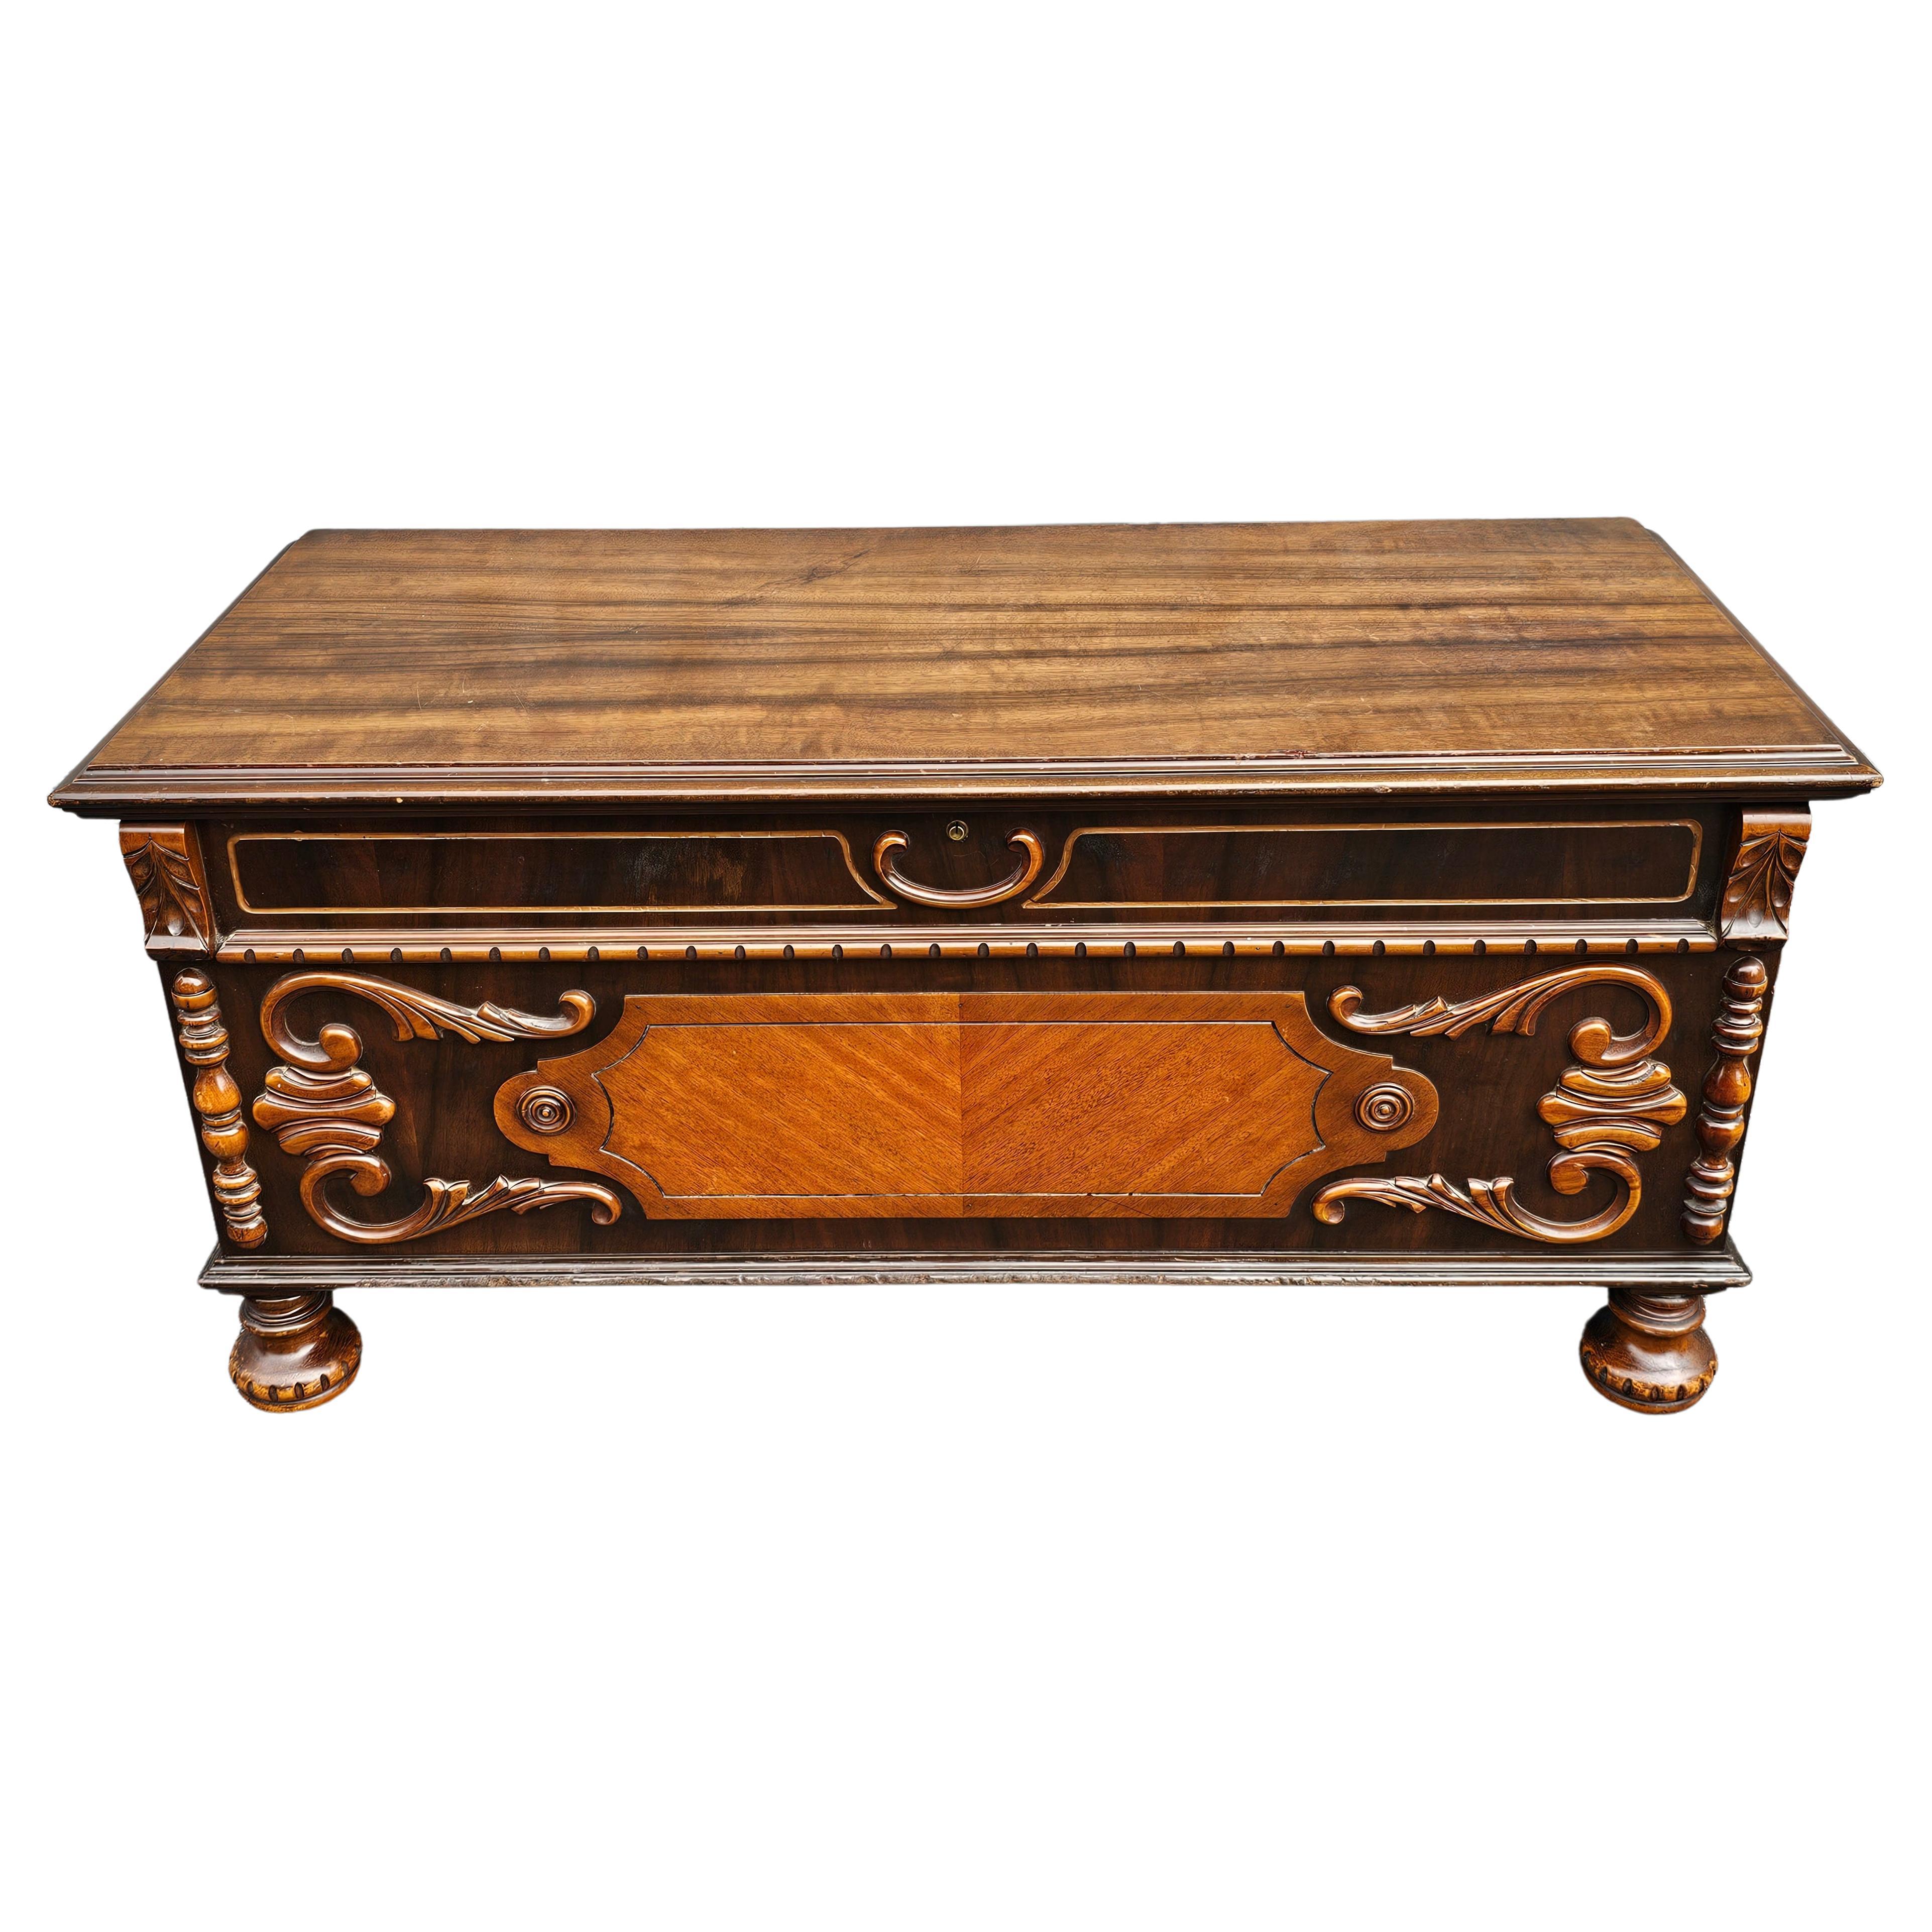 Haverty Furniture William And Mary Style Carved Mahogany and Cedar Blanket Chest